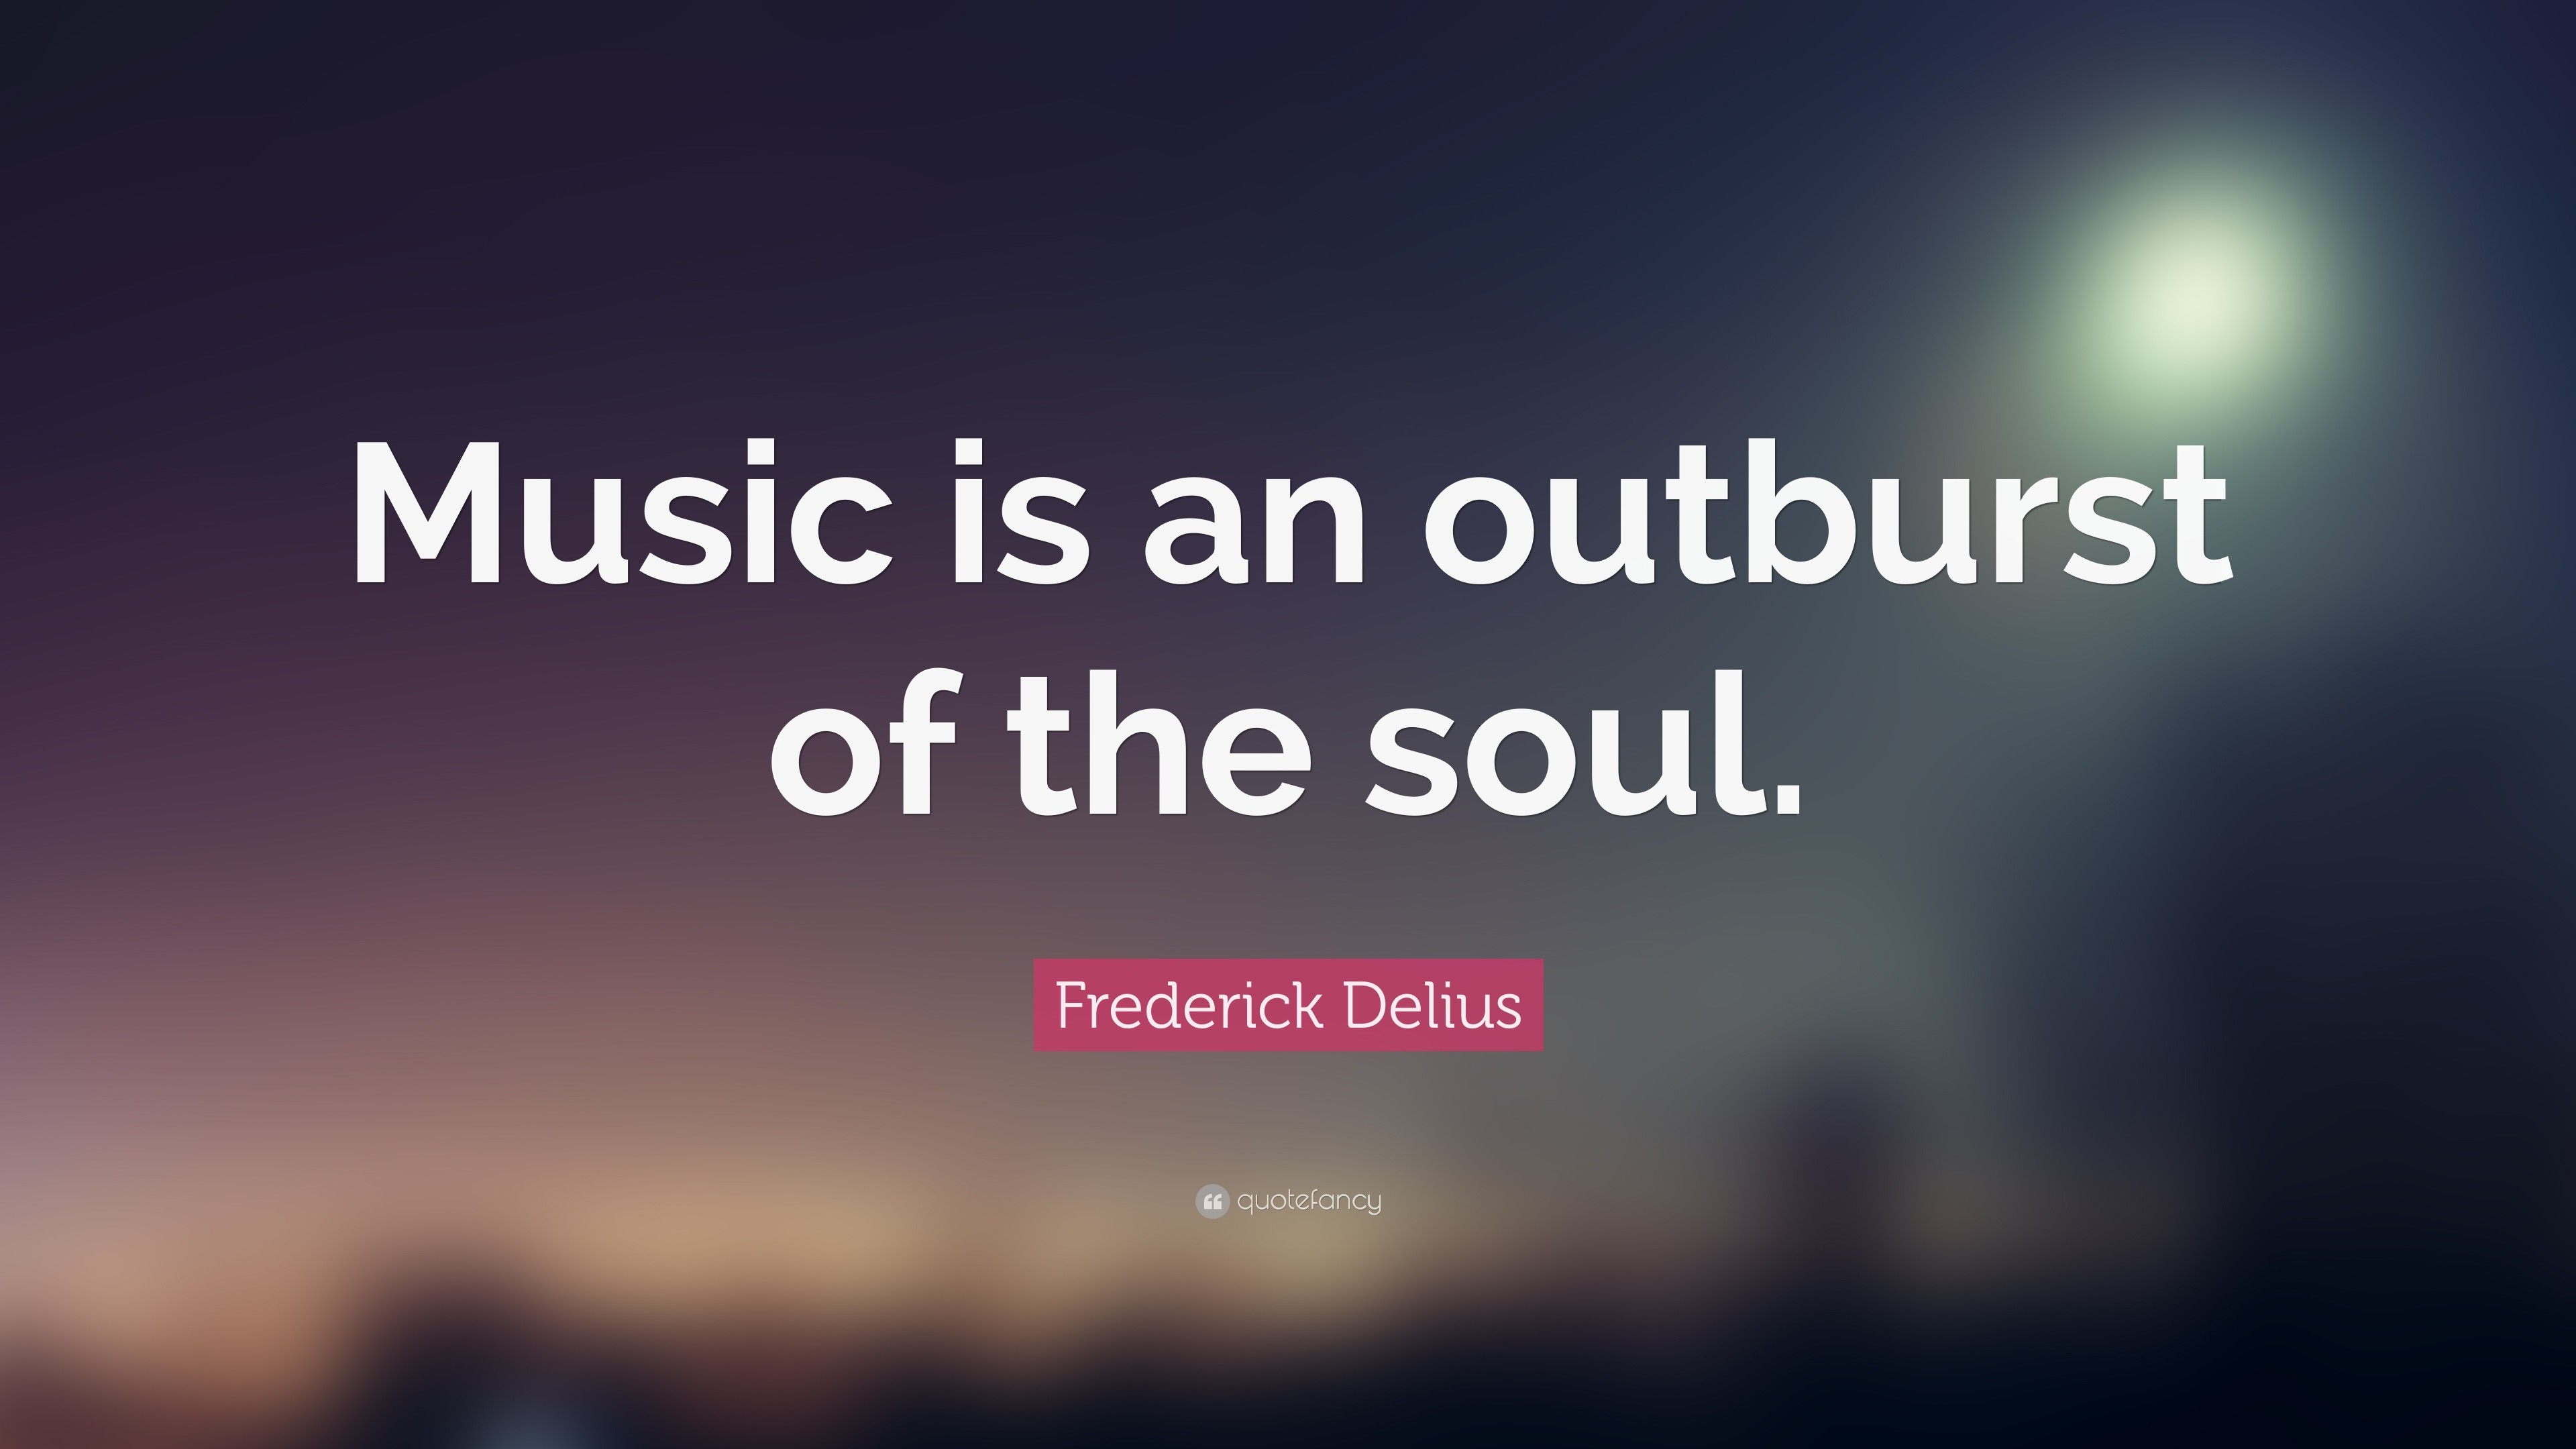 3840x2160 Music Quotes: “Music is an outburst of the soul.” — Frederick Delius